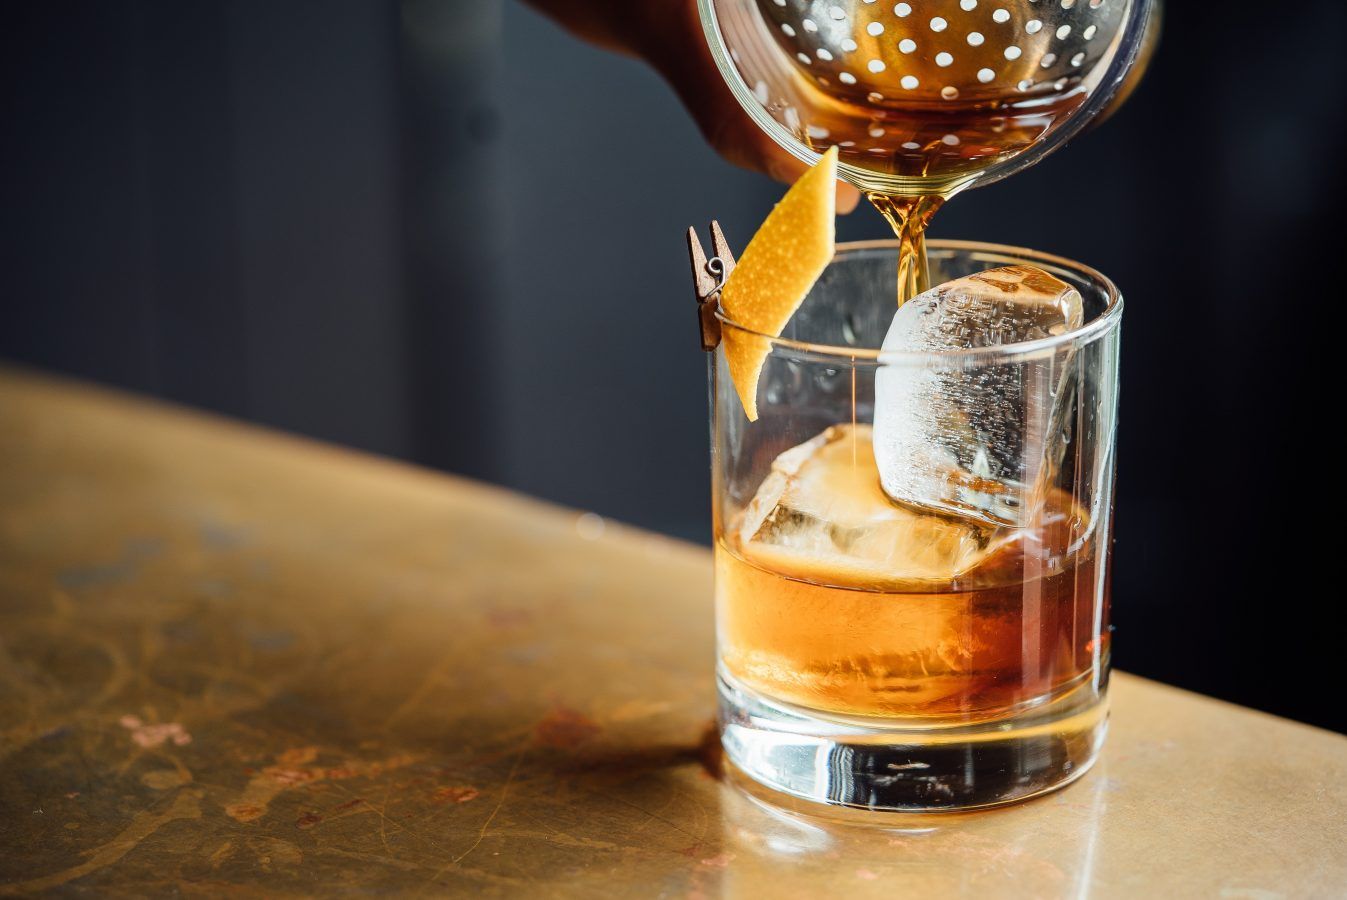 The difference between Scotch and other kinds of whiskey